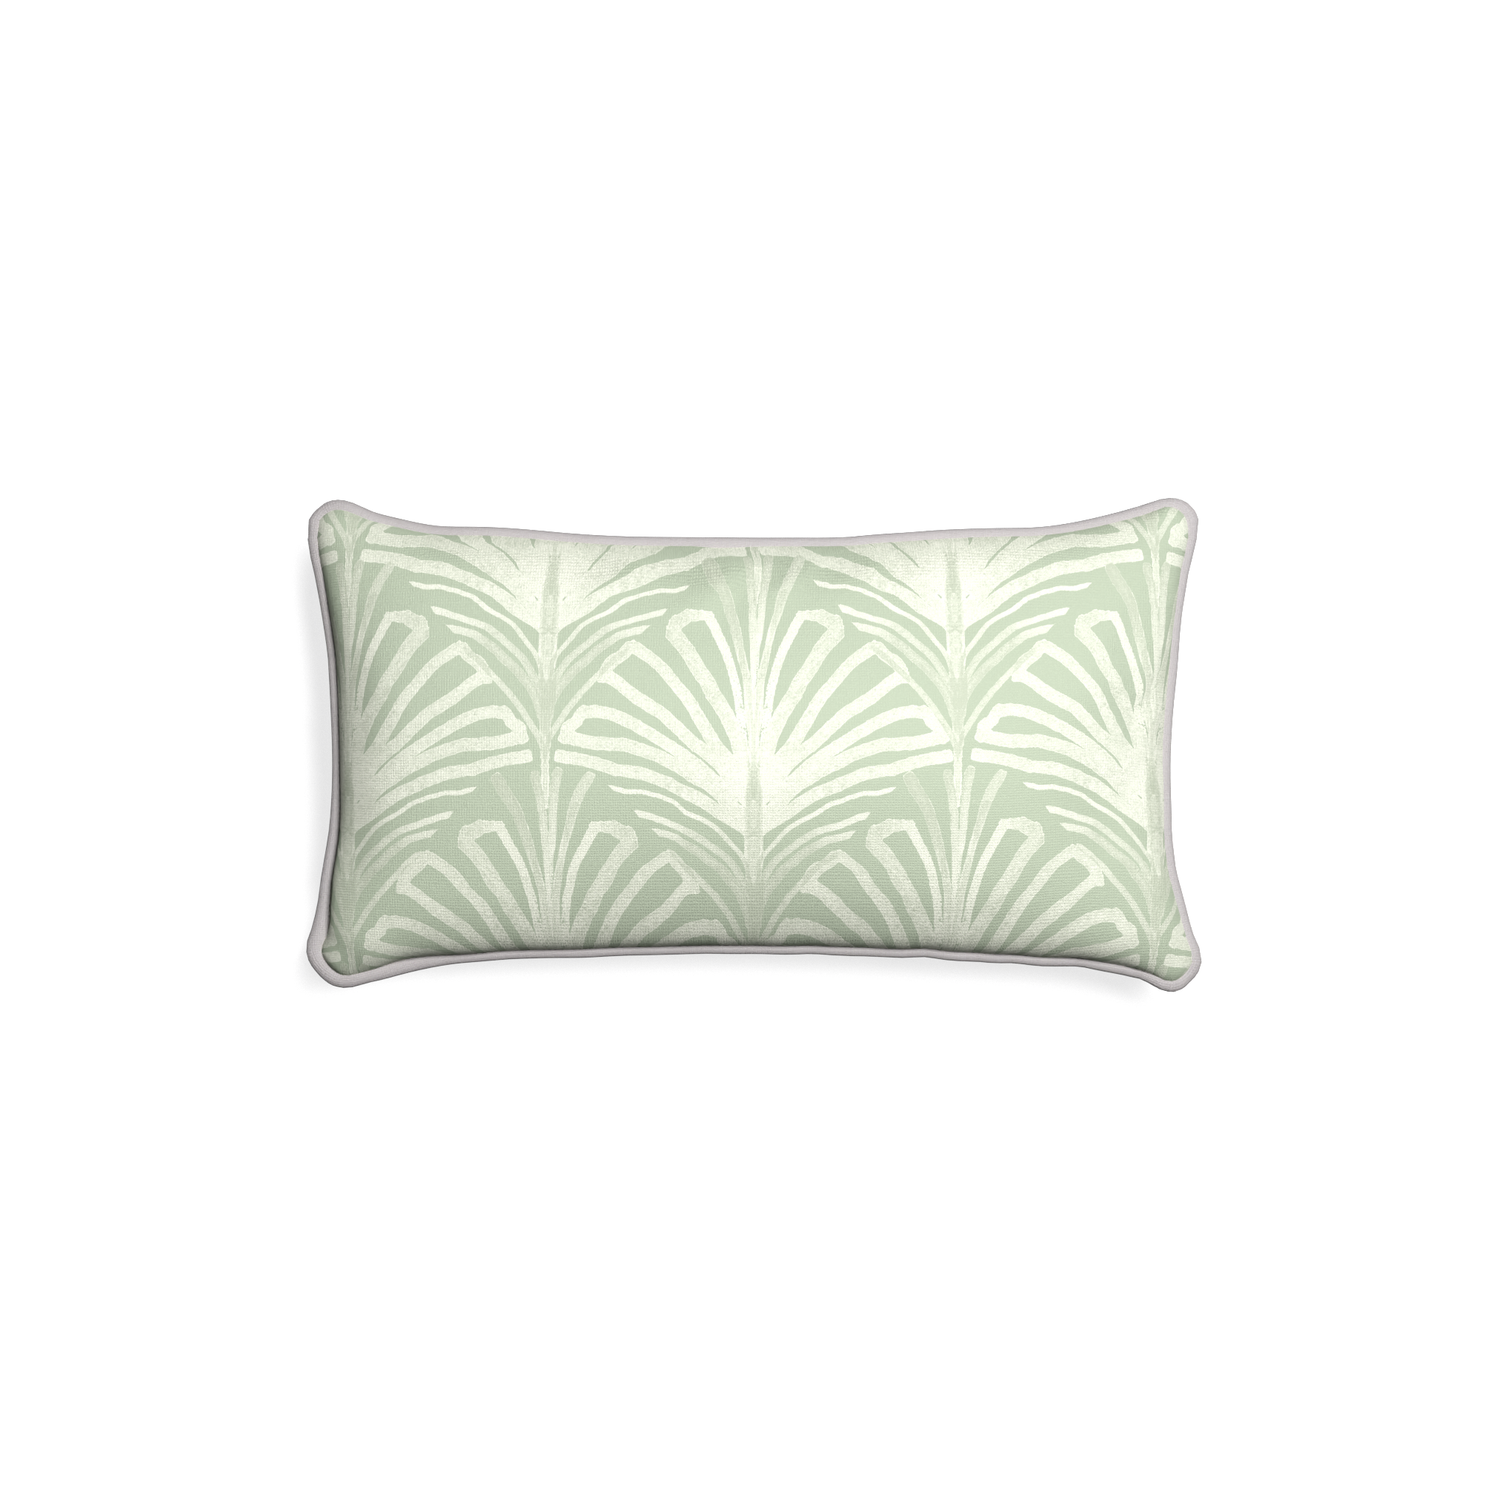 Petite-lumbar suzy sage custom sage green palmpillow with pebble piping on white background